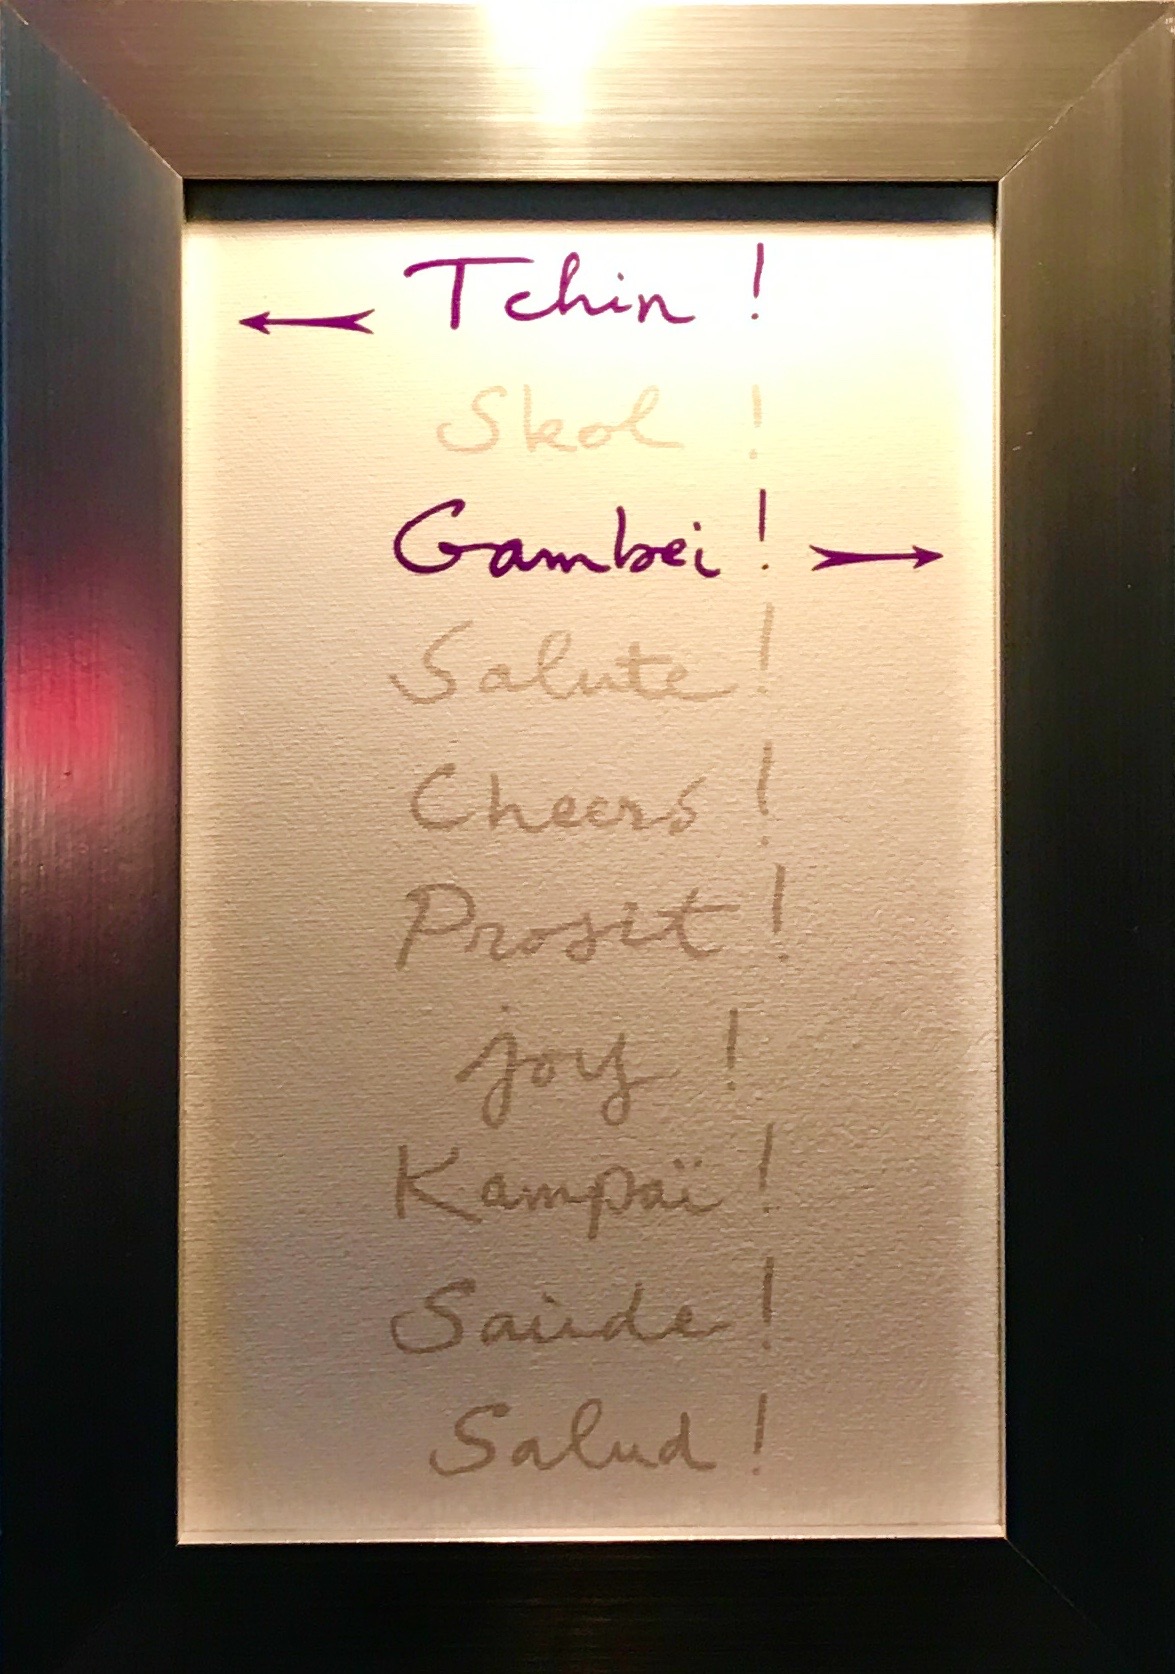 So many ways to say "Cheers." Each room at Hotel Les Avisés is named for a unique toast.